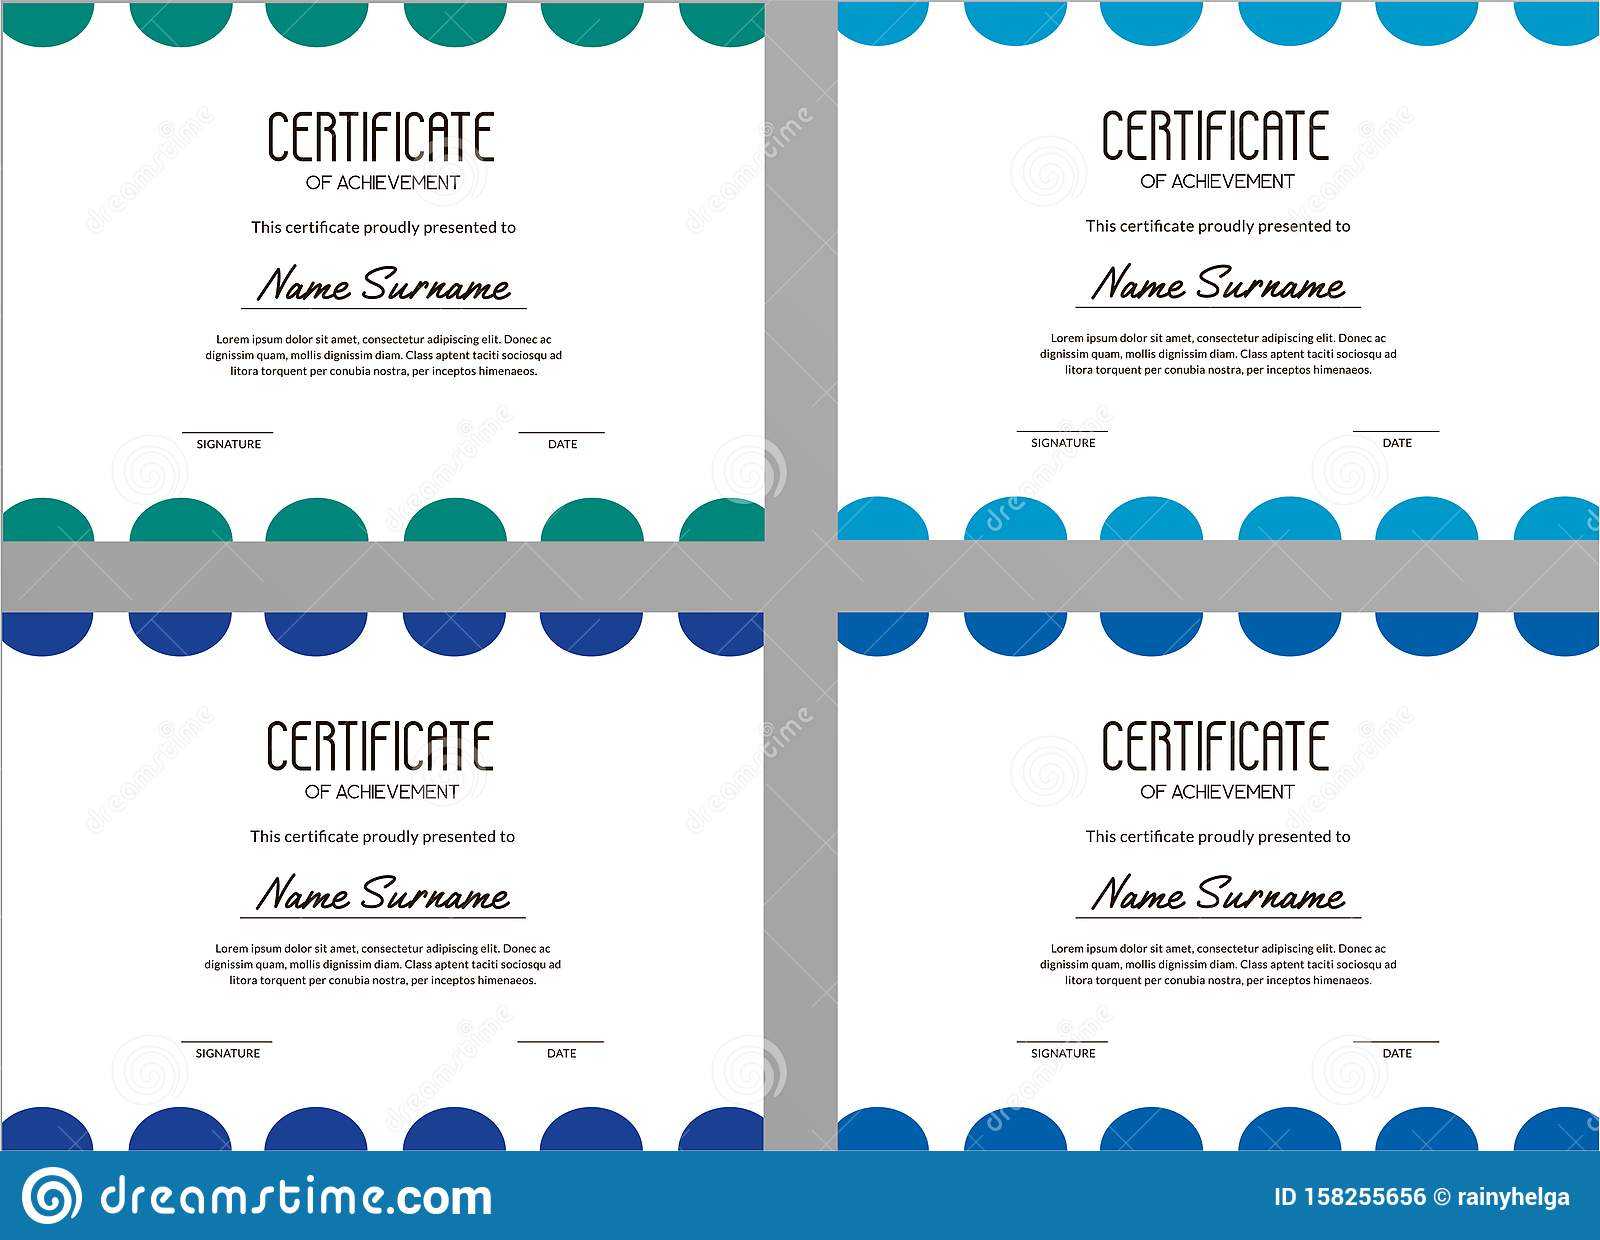 Set Of Clean Certificate Templates With Colorful Circles In Update Certificates That Use Certificate Templates